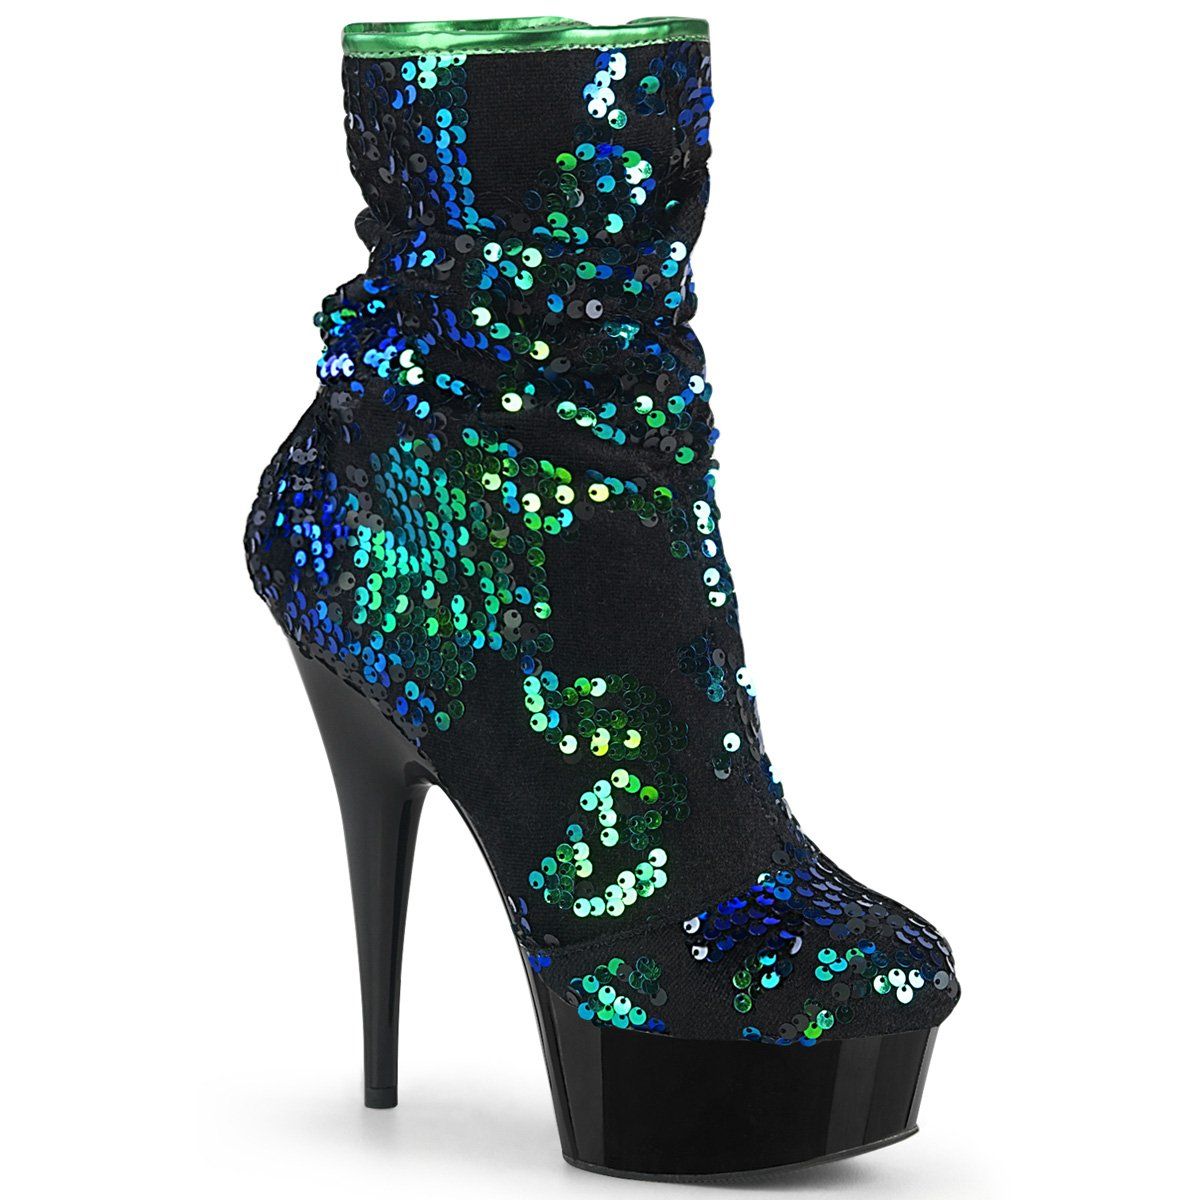 DELIGHT-1004 Green Iridescent Sequins/Black Ankle Boot Pleaser